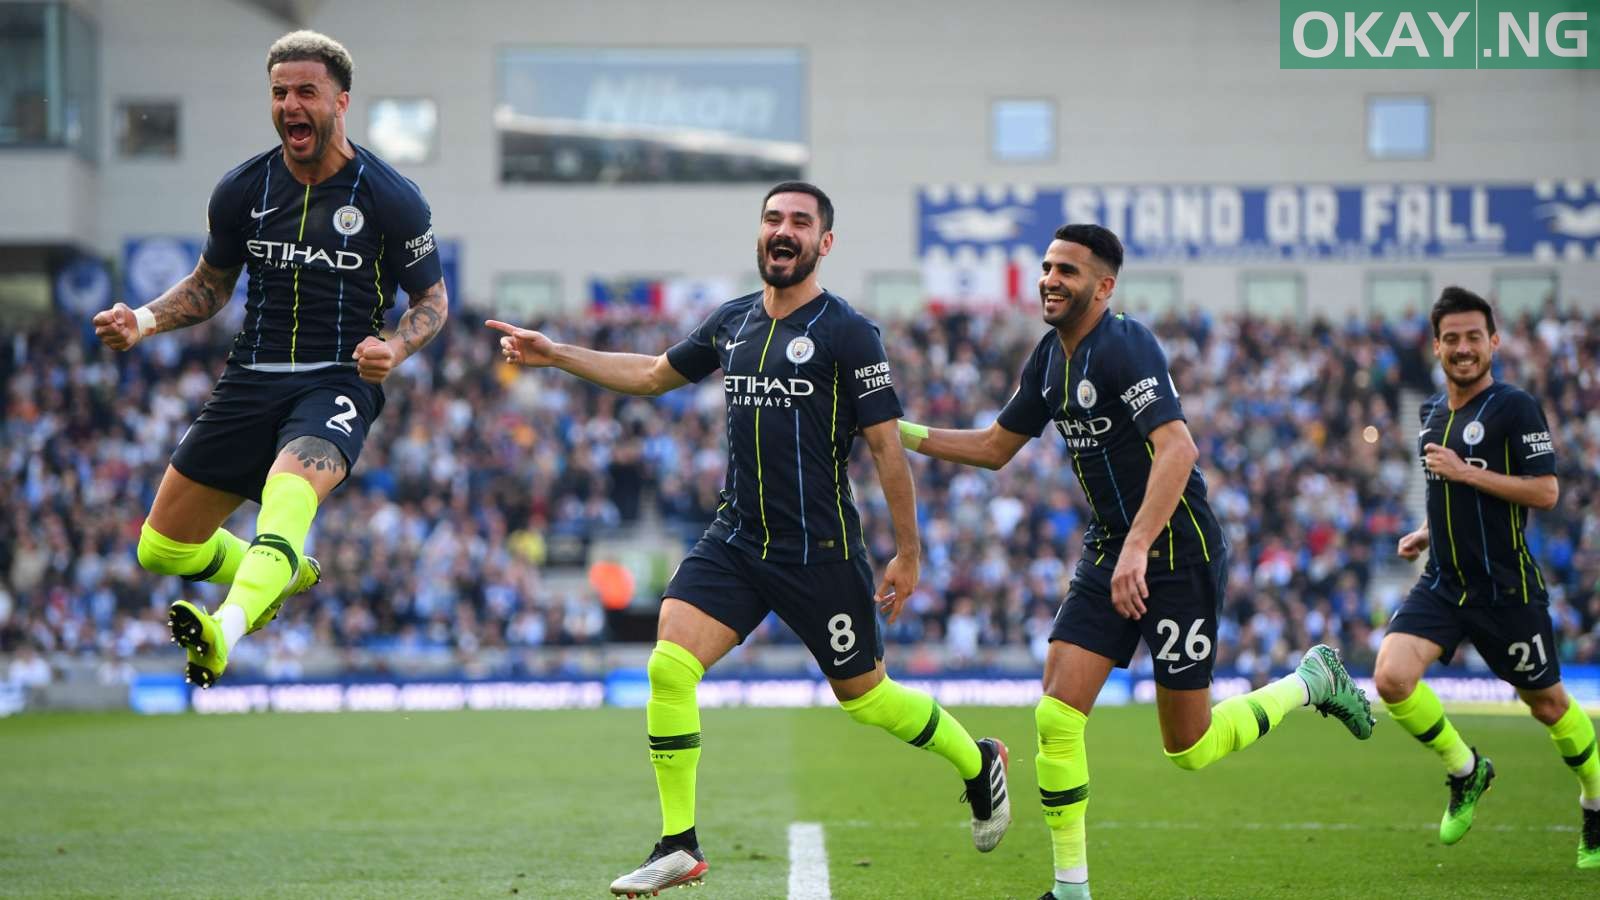 Manchester City players celebrating goals against Brighton and Hove Albion